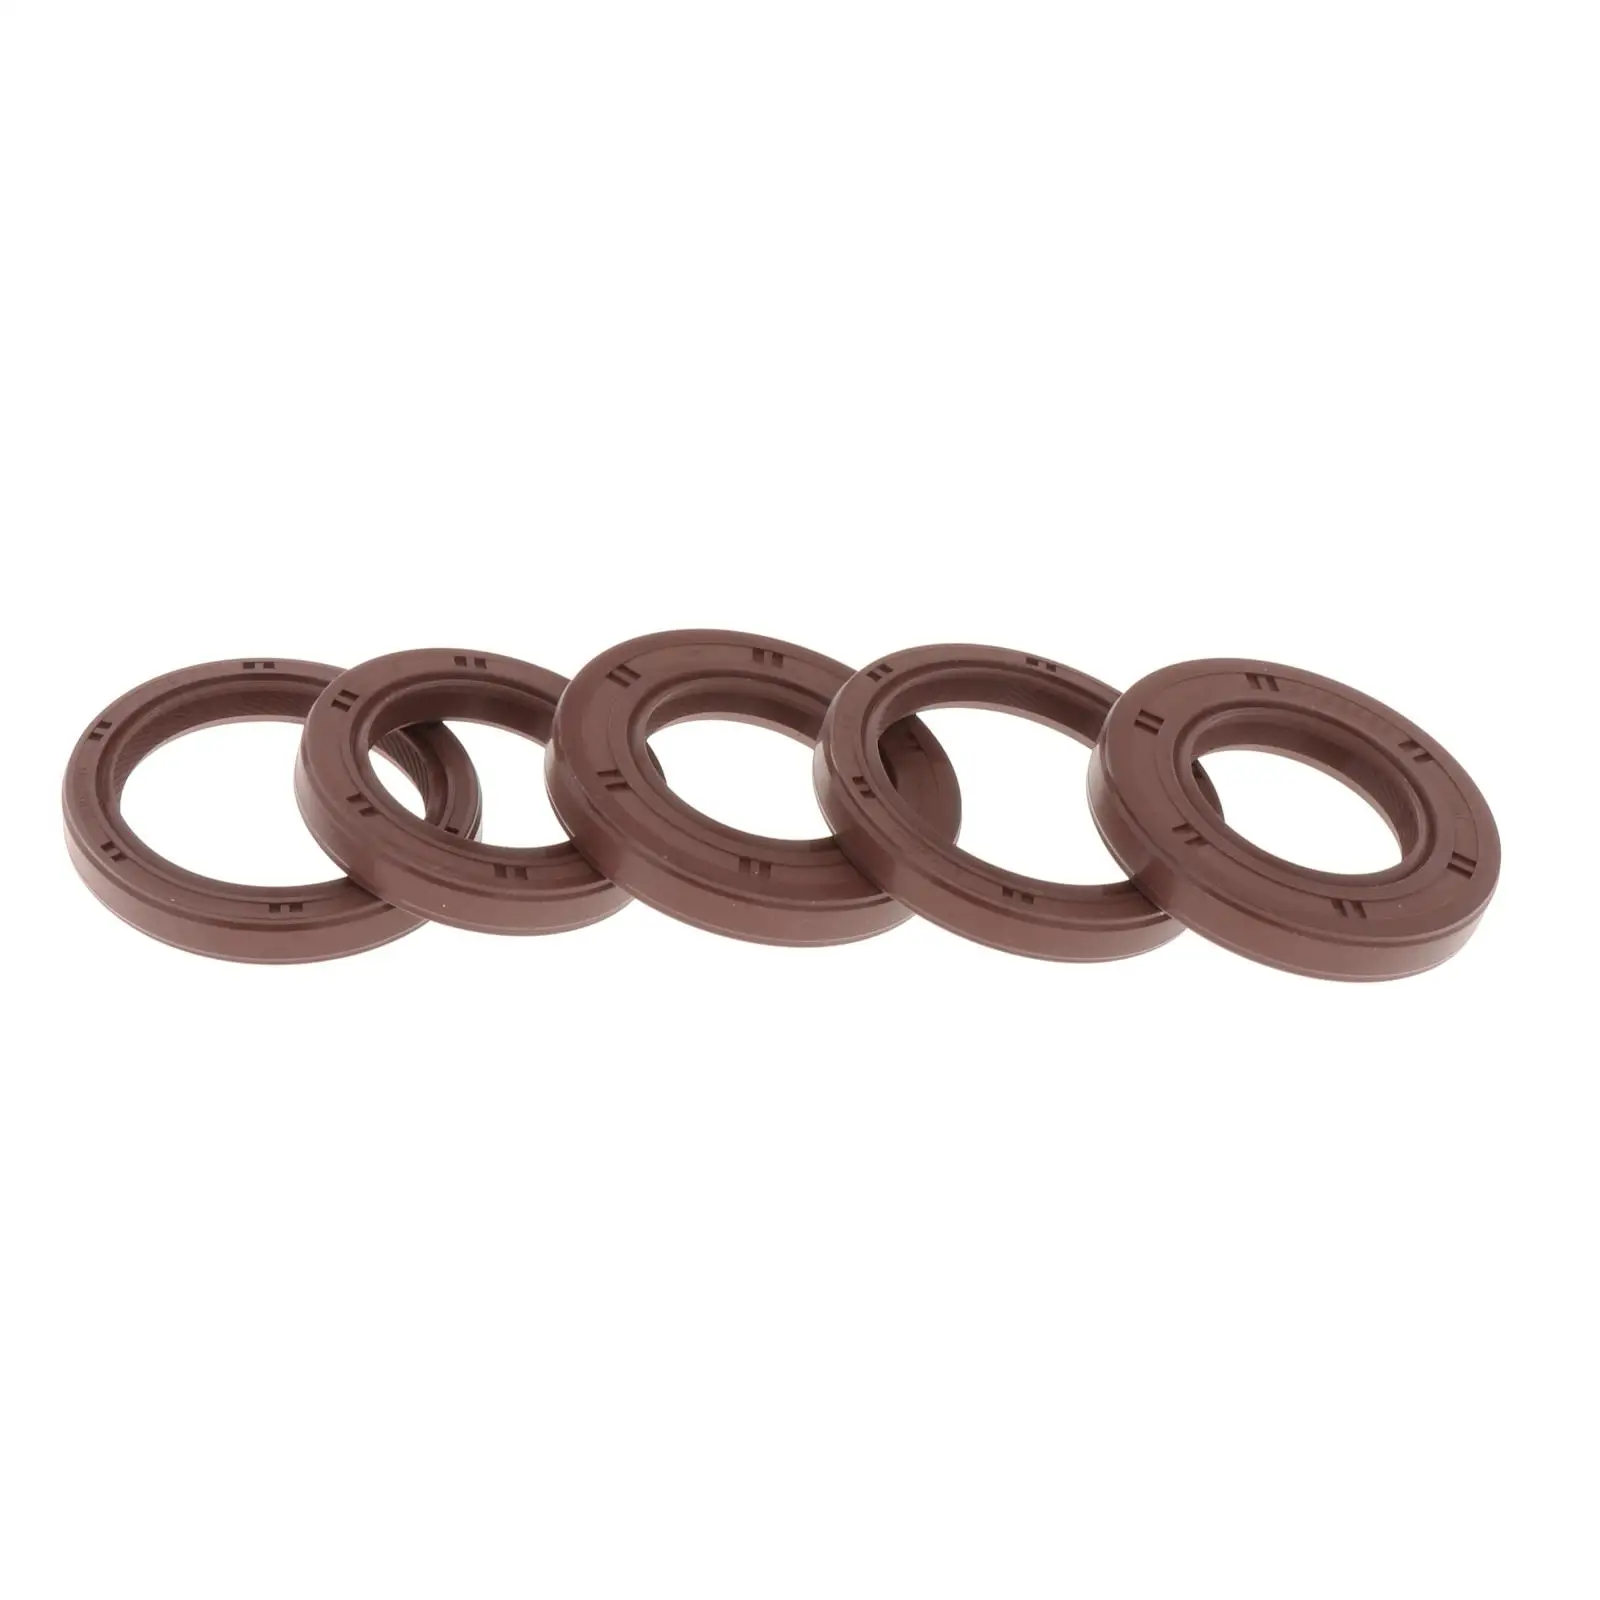 5Pcs 806732160 Oil Seal Kit Car Interior Moulding Accessories Supplies for Forester 2004-2013 for Outback 2005-2013 2.5L